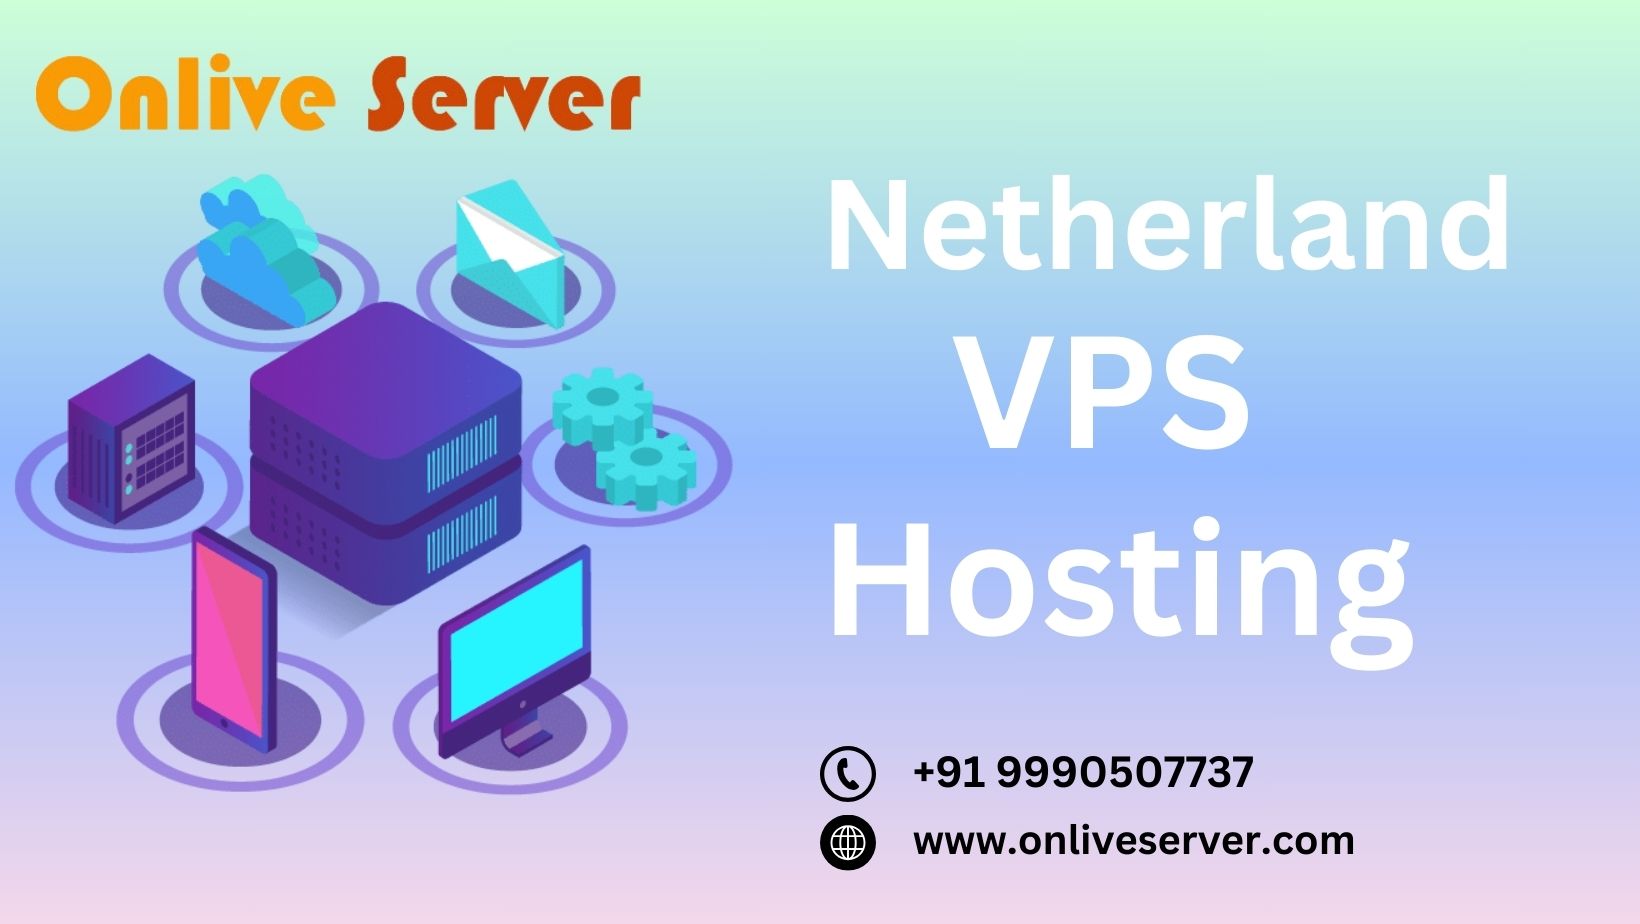 Virtual Private Servers have gained popularity for their performance, flexibility, and cost-effectiveness. In this article, we will delve into the world of Netherlands VPS Hosting and explore the key benefits it offers.